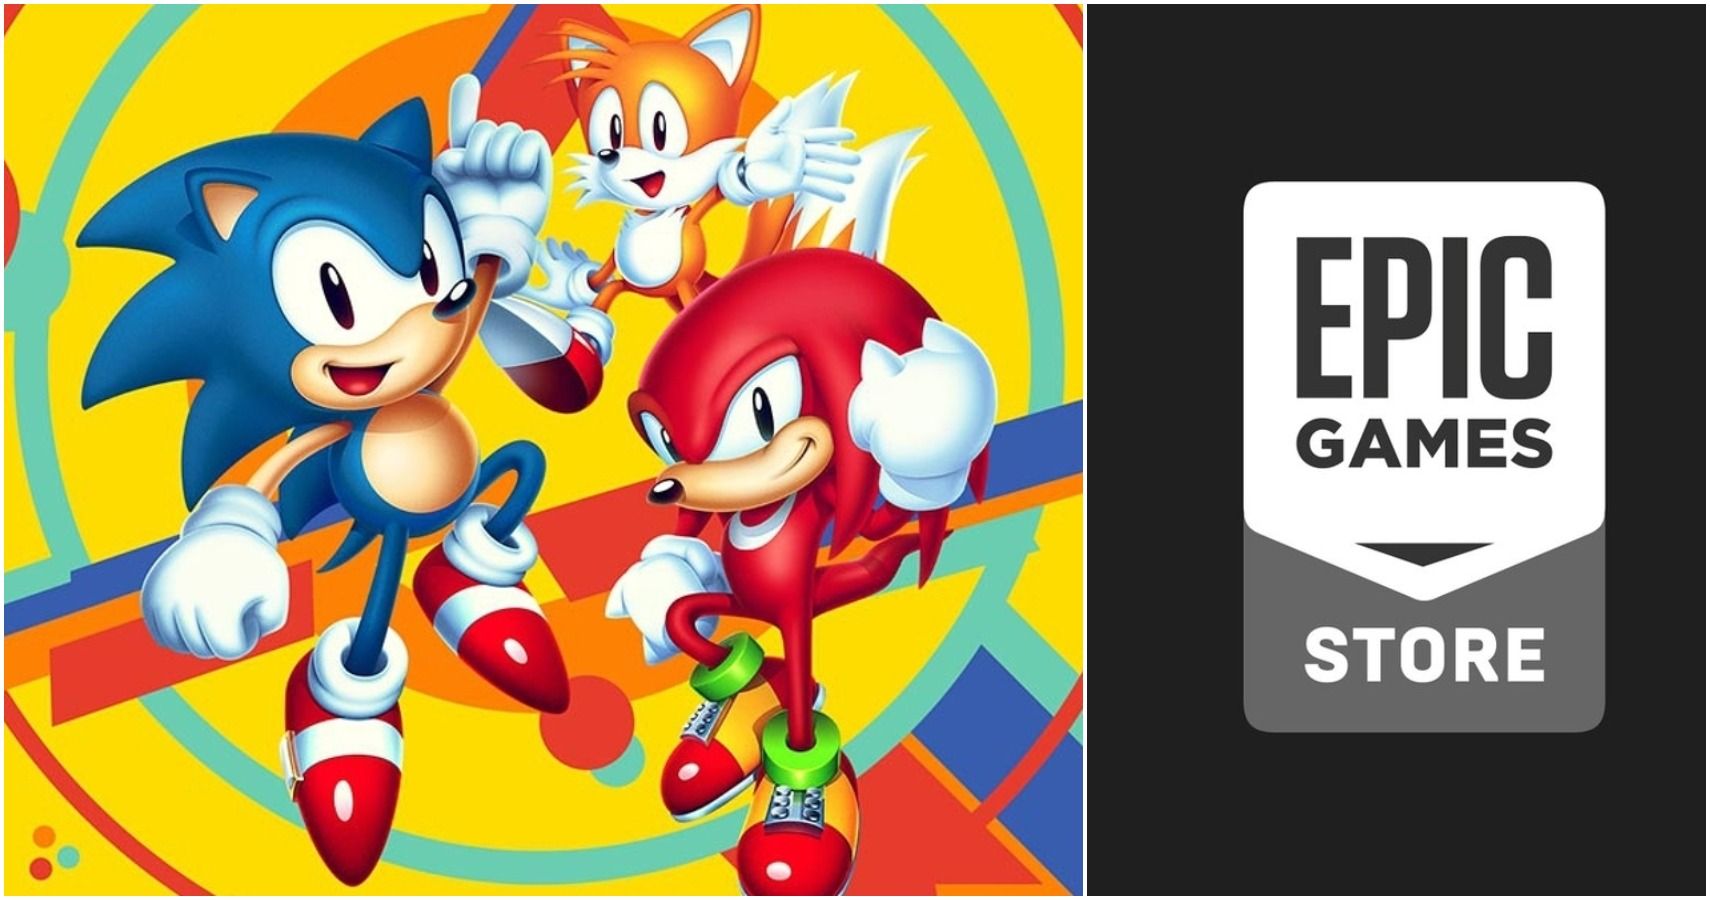 Sonic Origins | Download and Buy Today - Epic Games Store